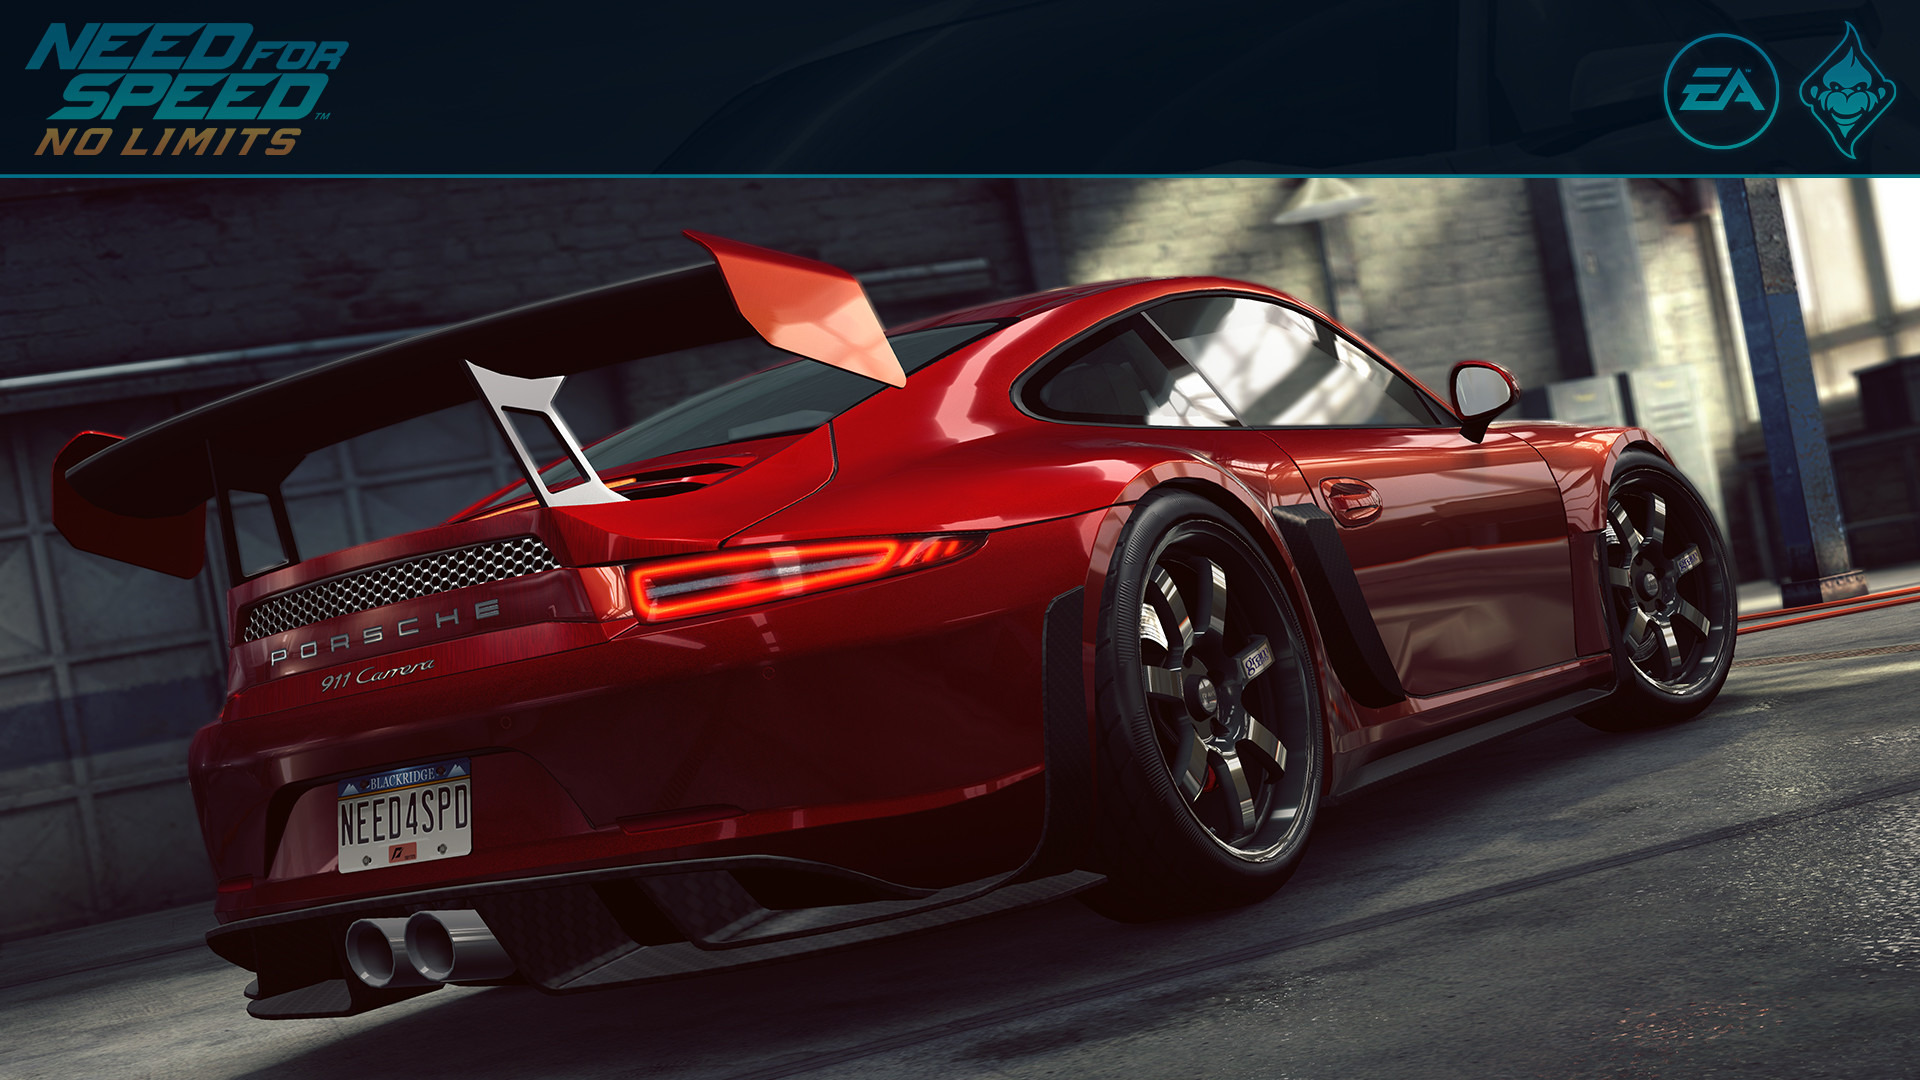 Need for Speed: No Limits, Video games, Car, Vehicle, Garages, Porsche 911 Carrera S, Tuning, Need for Speed Wallpaper